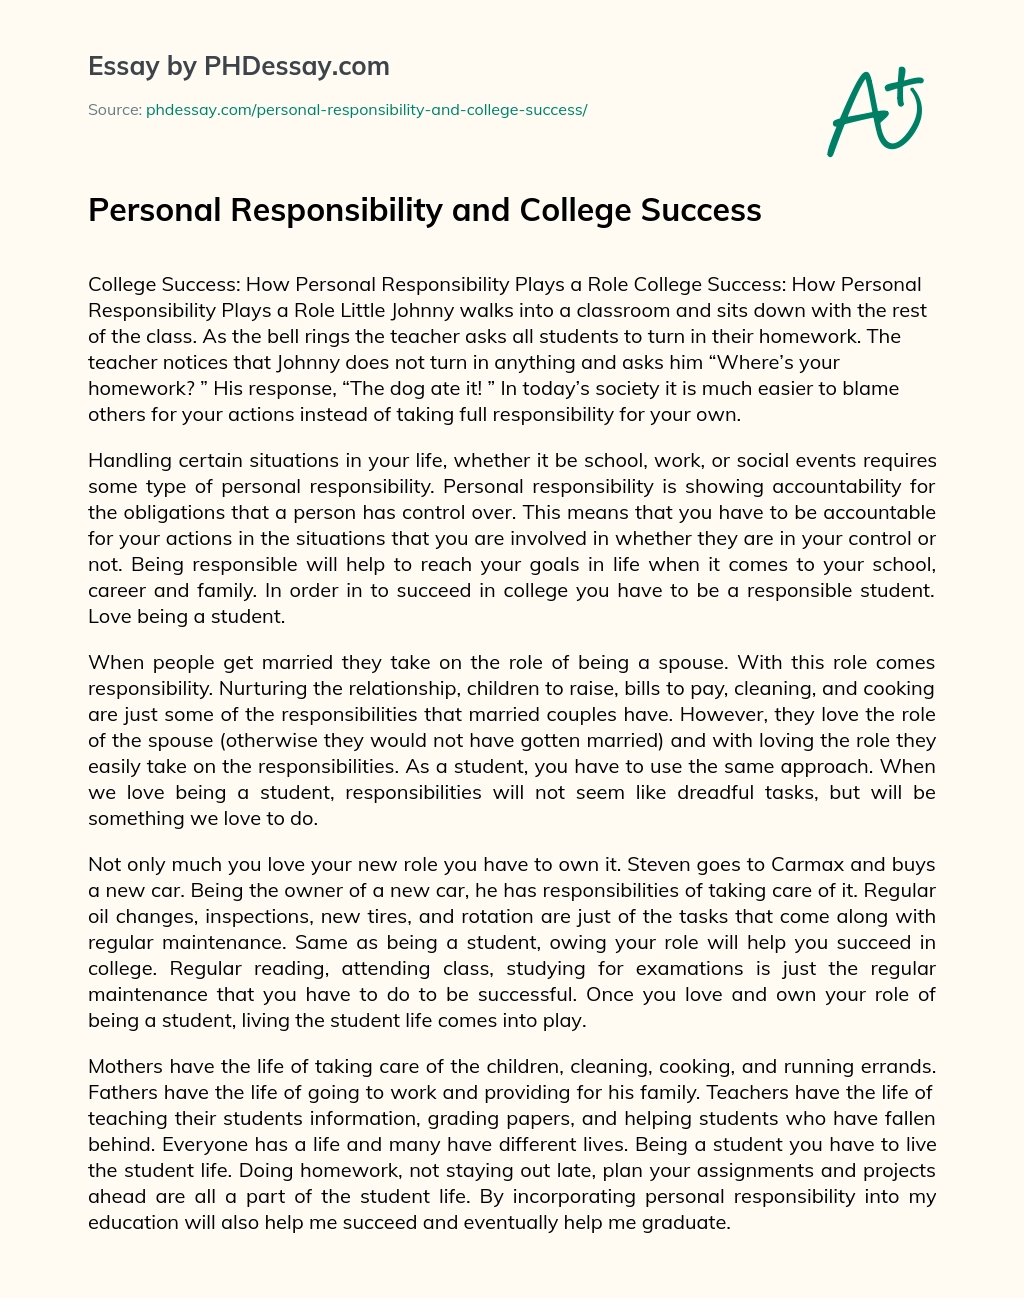 Personal Responsibility and College Success